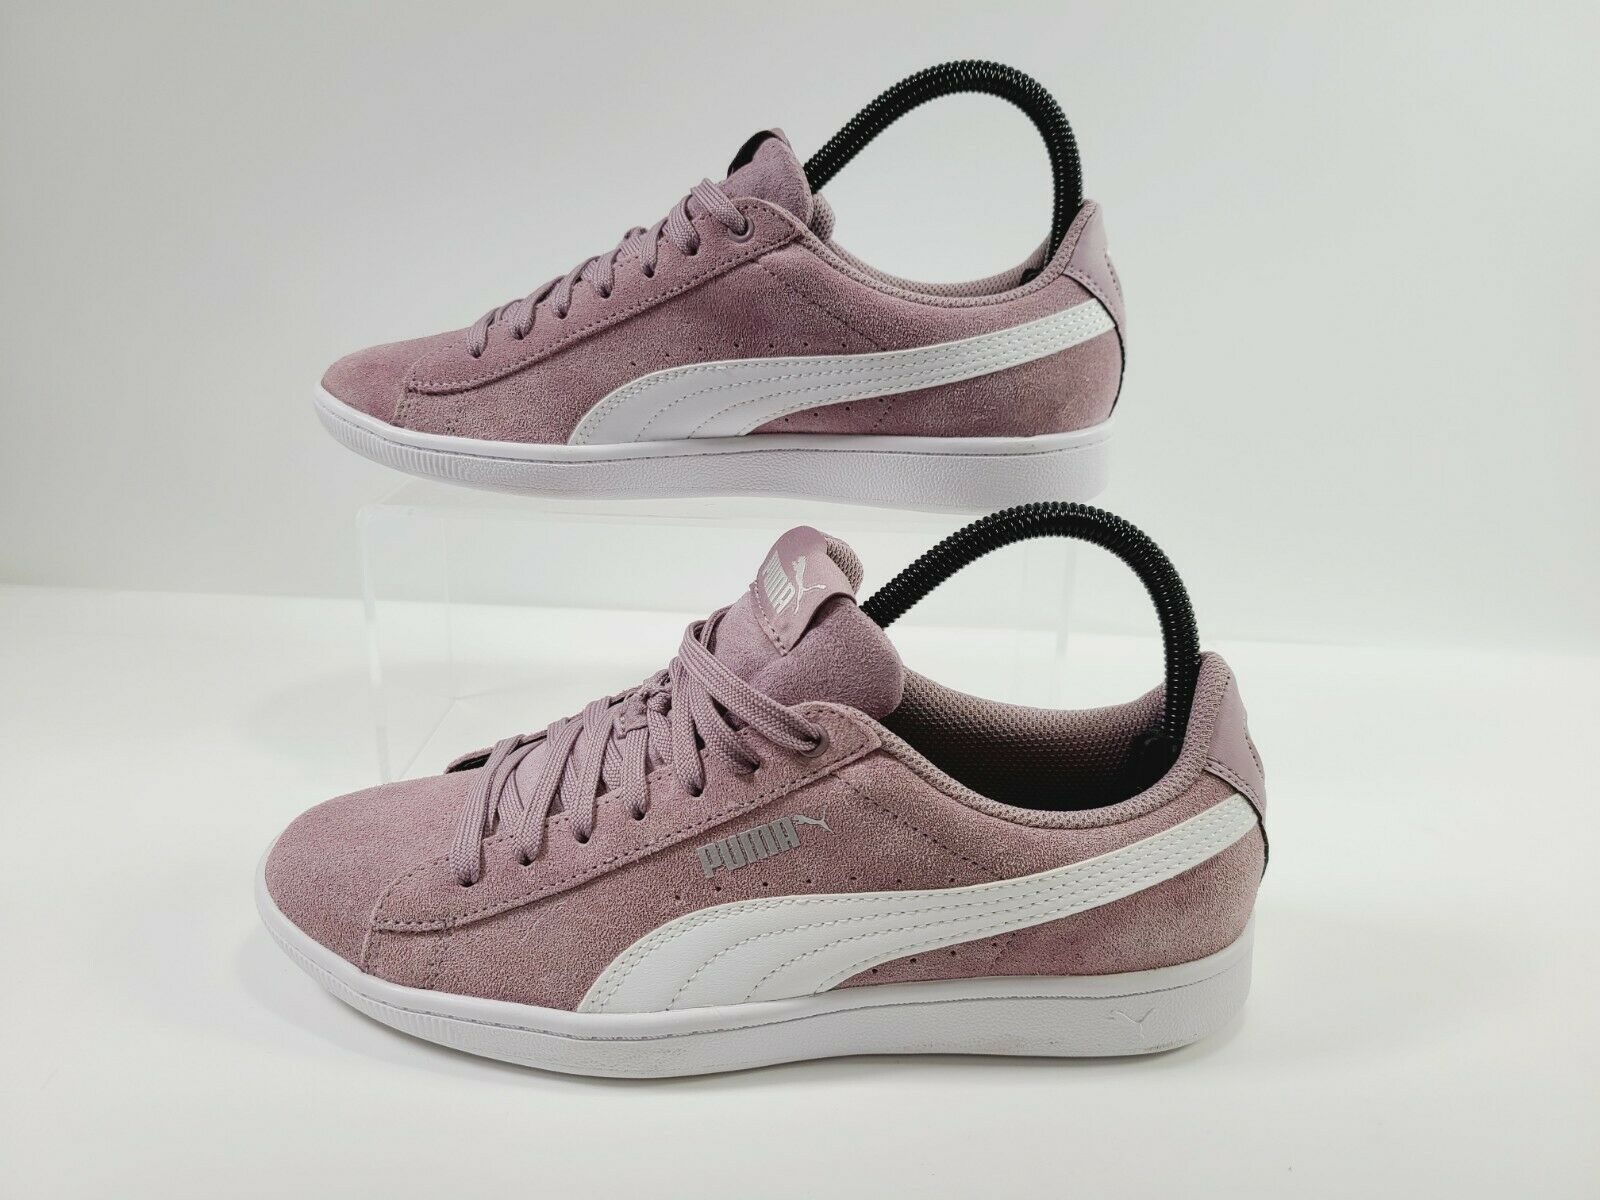 Puma Women’s Size 8 Vikky 370204 01 Fashion Sneakers Suede Shoes